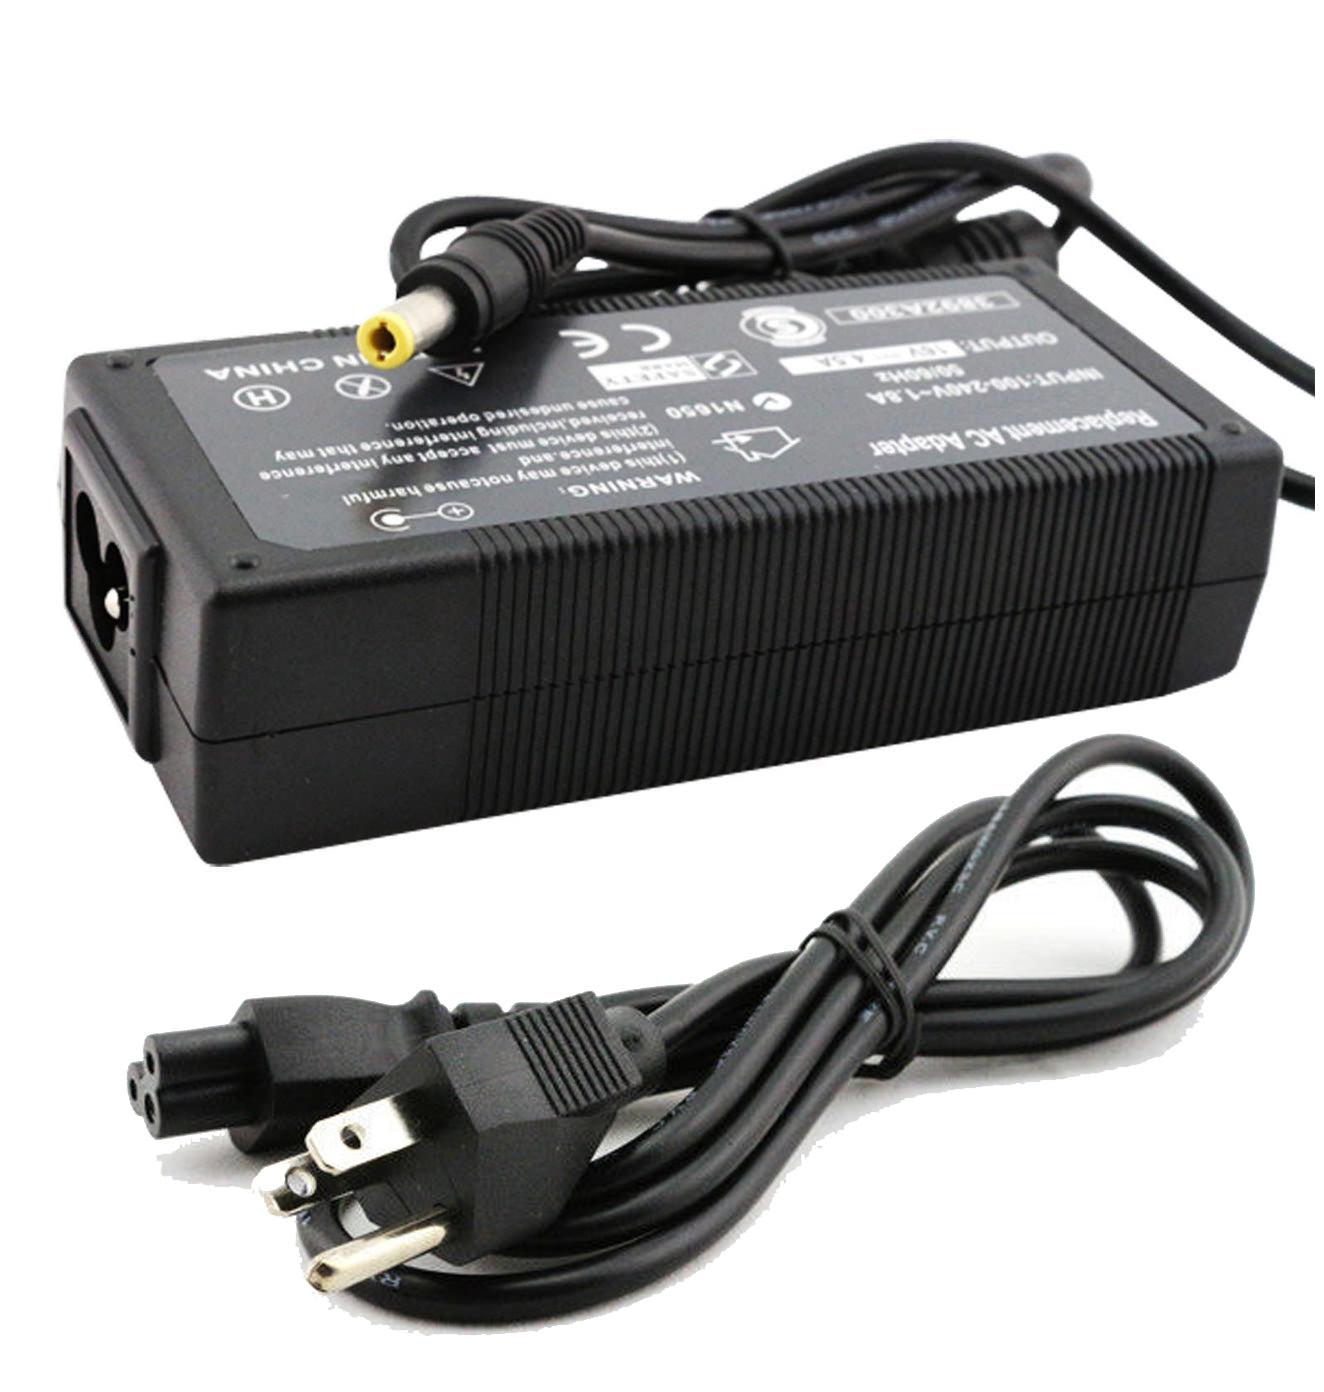 AC Adapter Charger for IBM ThinkPad 92P1020 Notebook.